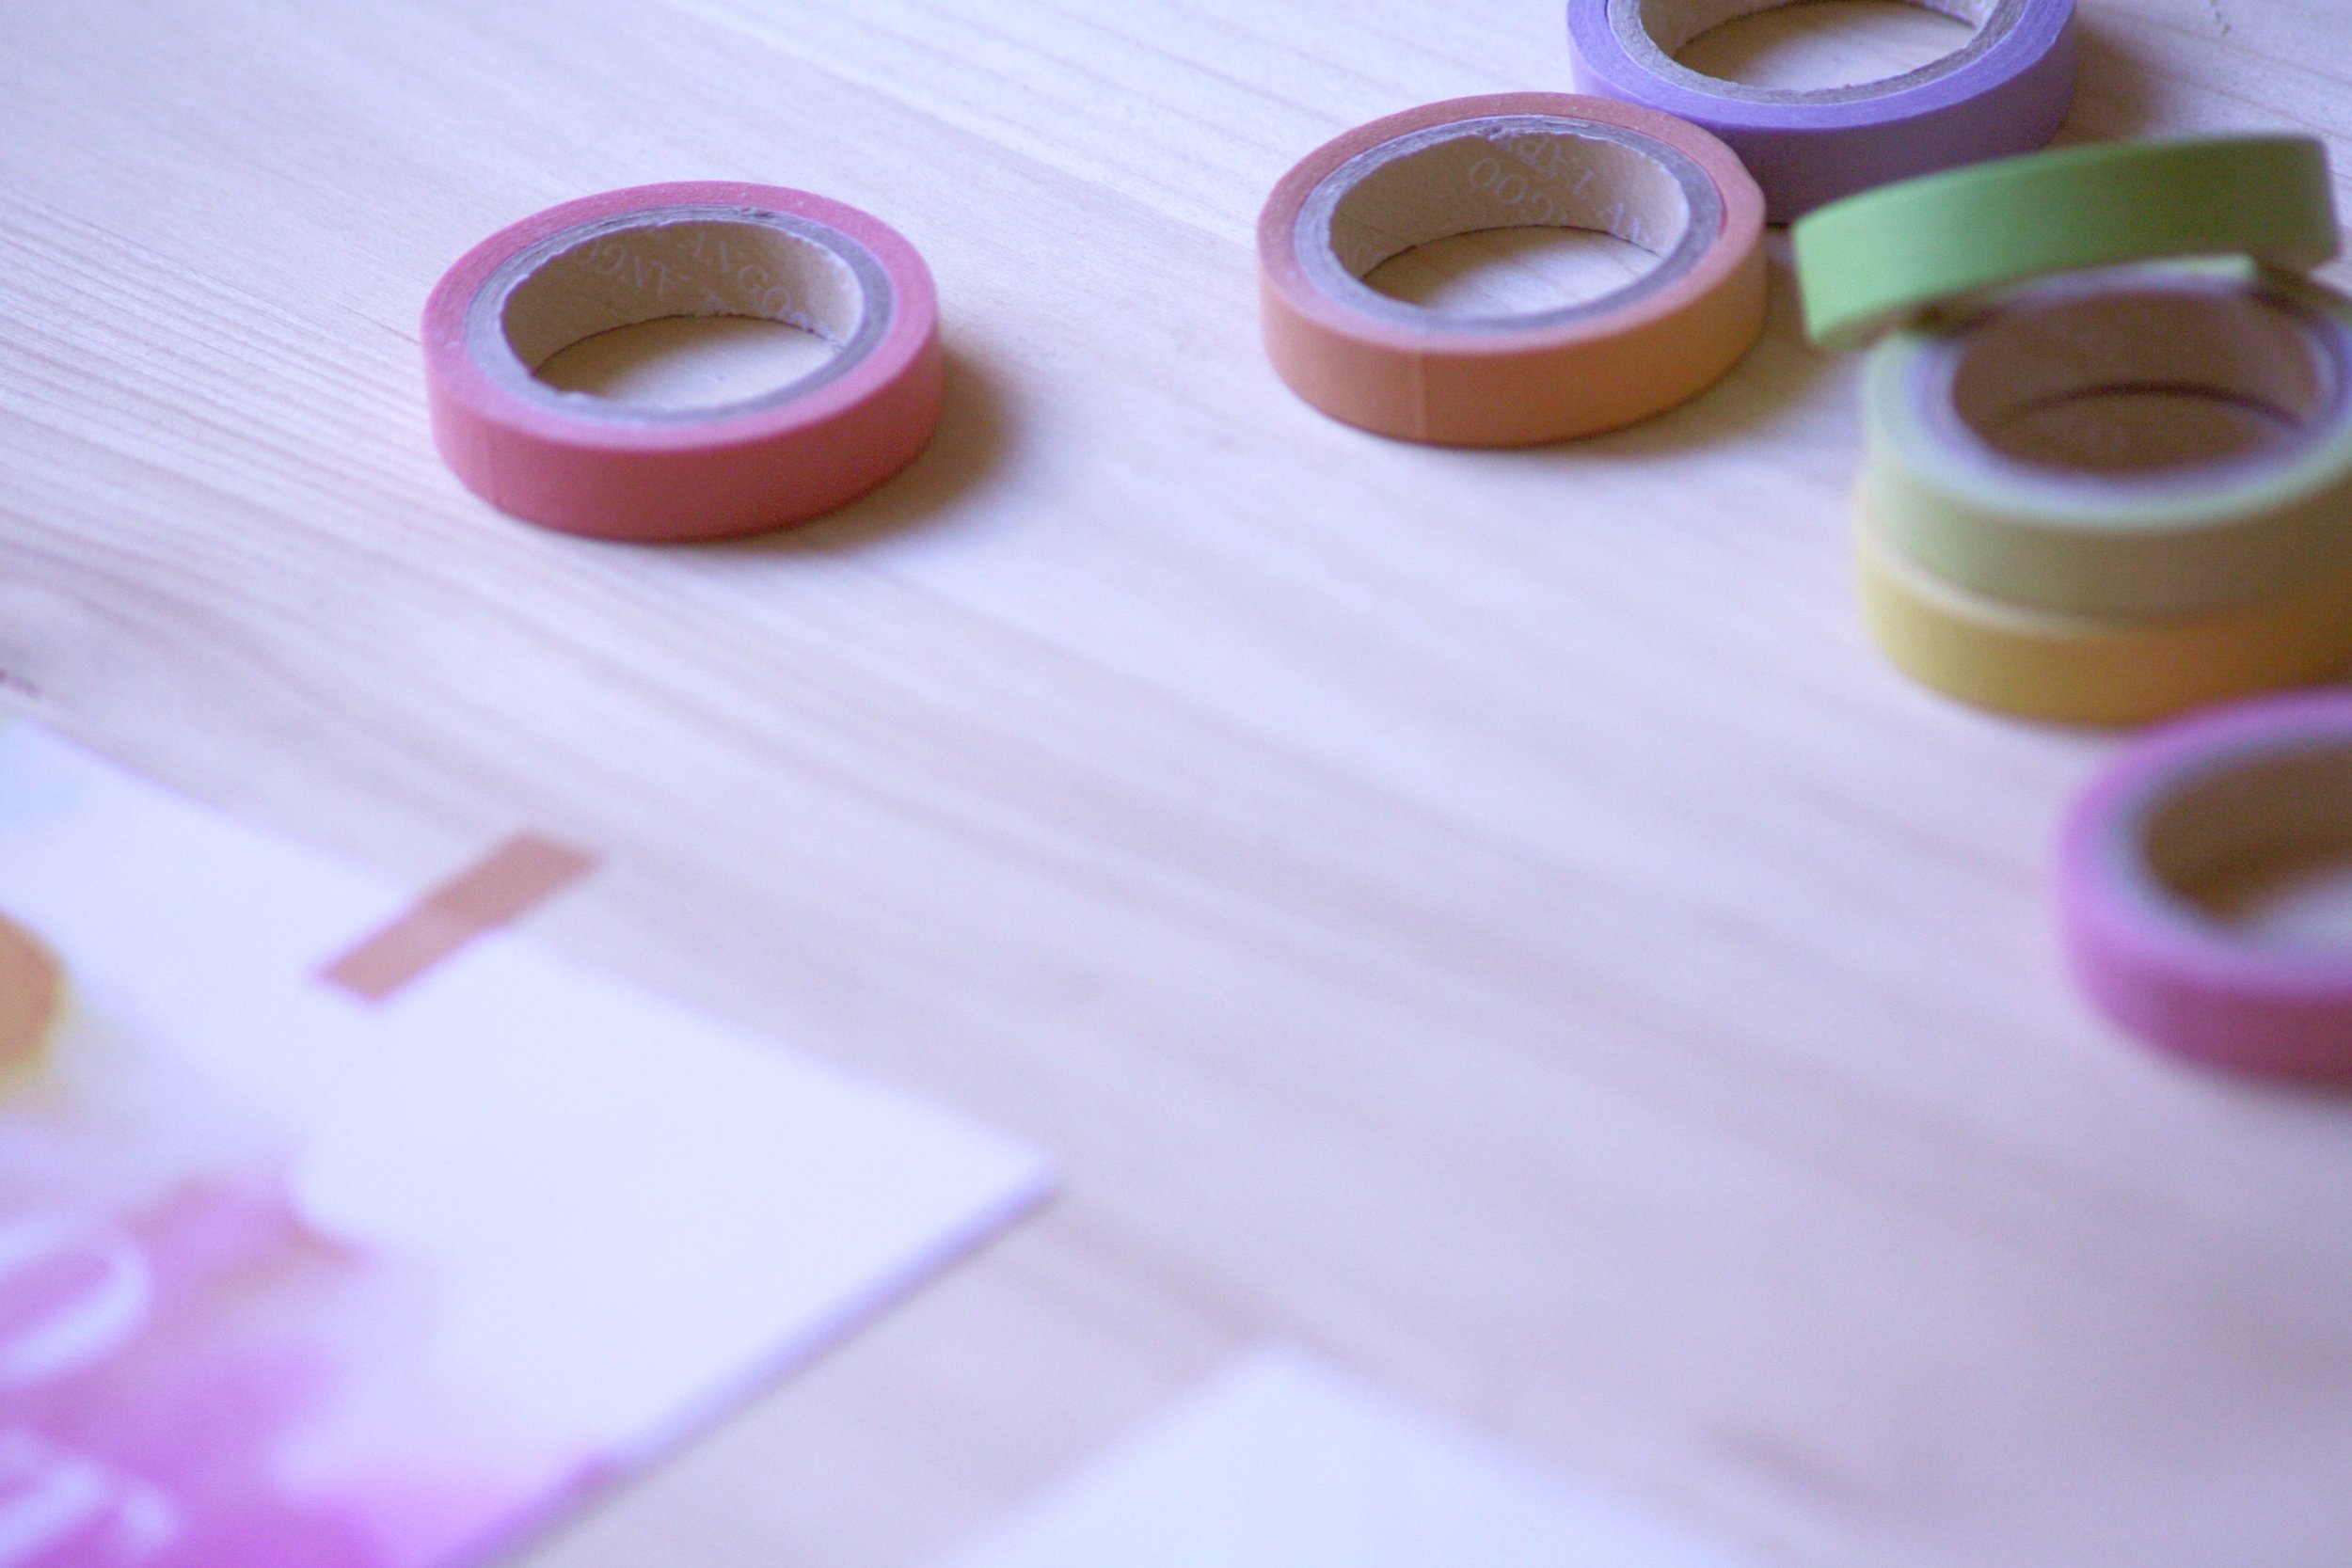 Need Some Colorful, Versatile Washi Tape? Check This Out!